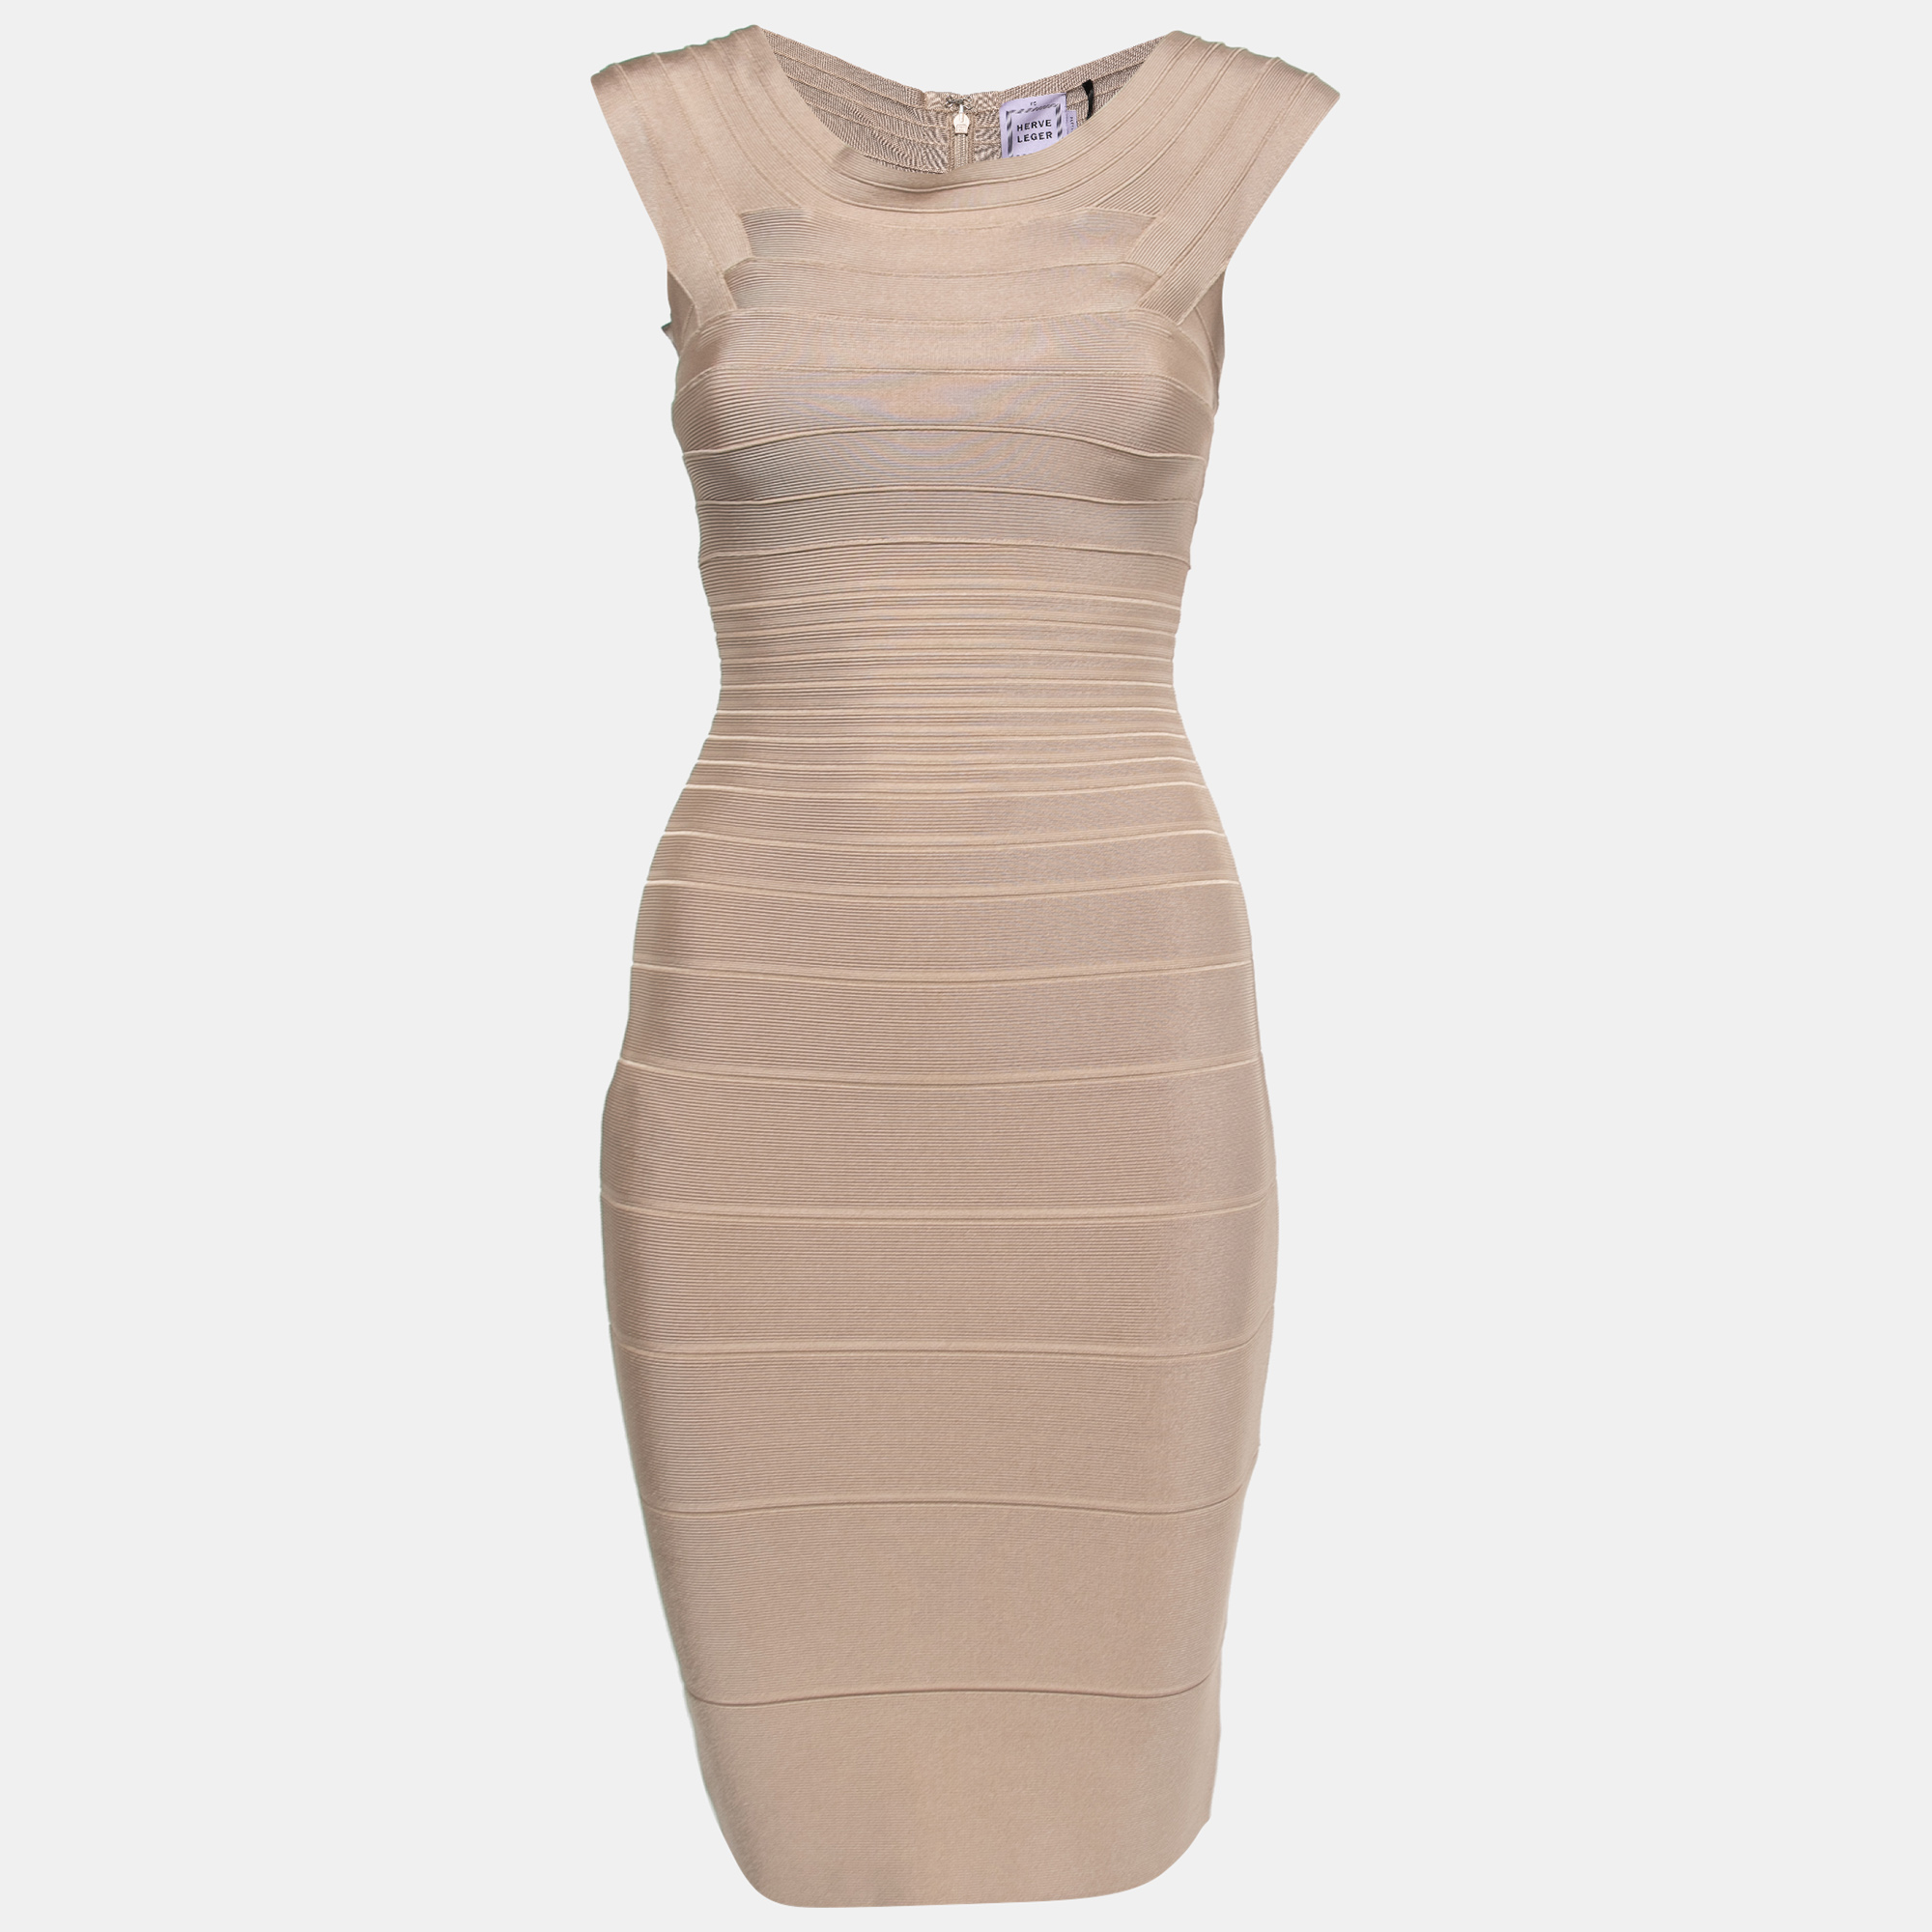 Herve Legers Bandage creations are a craze amongst women around the world and why not This beige dress is so beautiful youll look like a dreamy vision every time you slip into it.